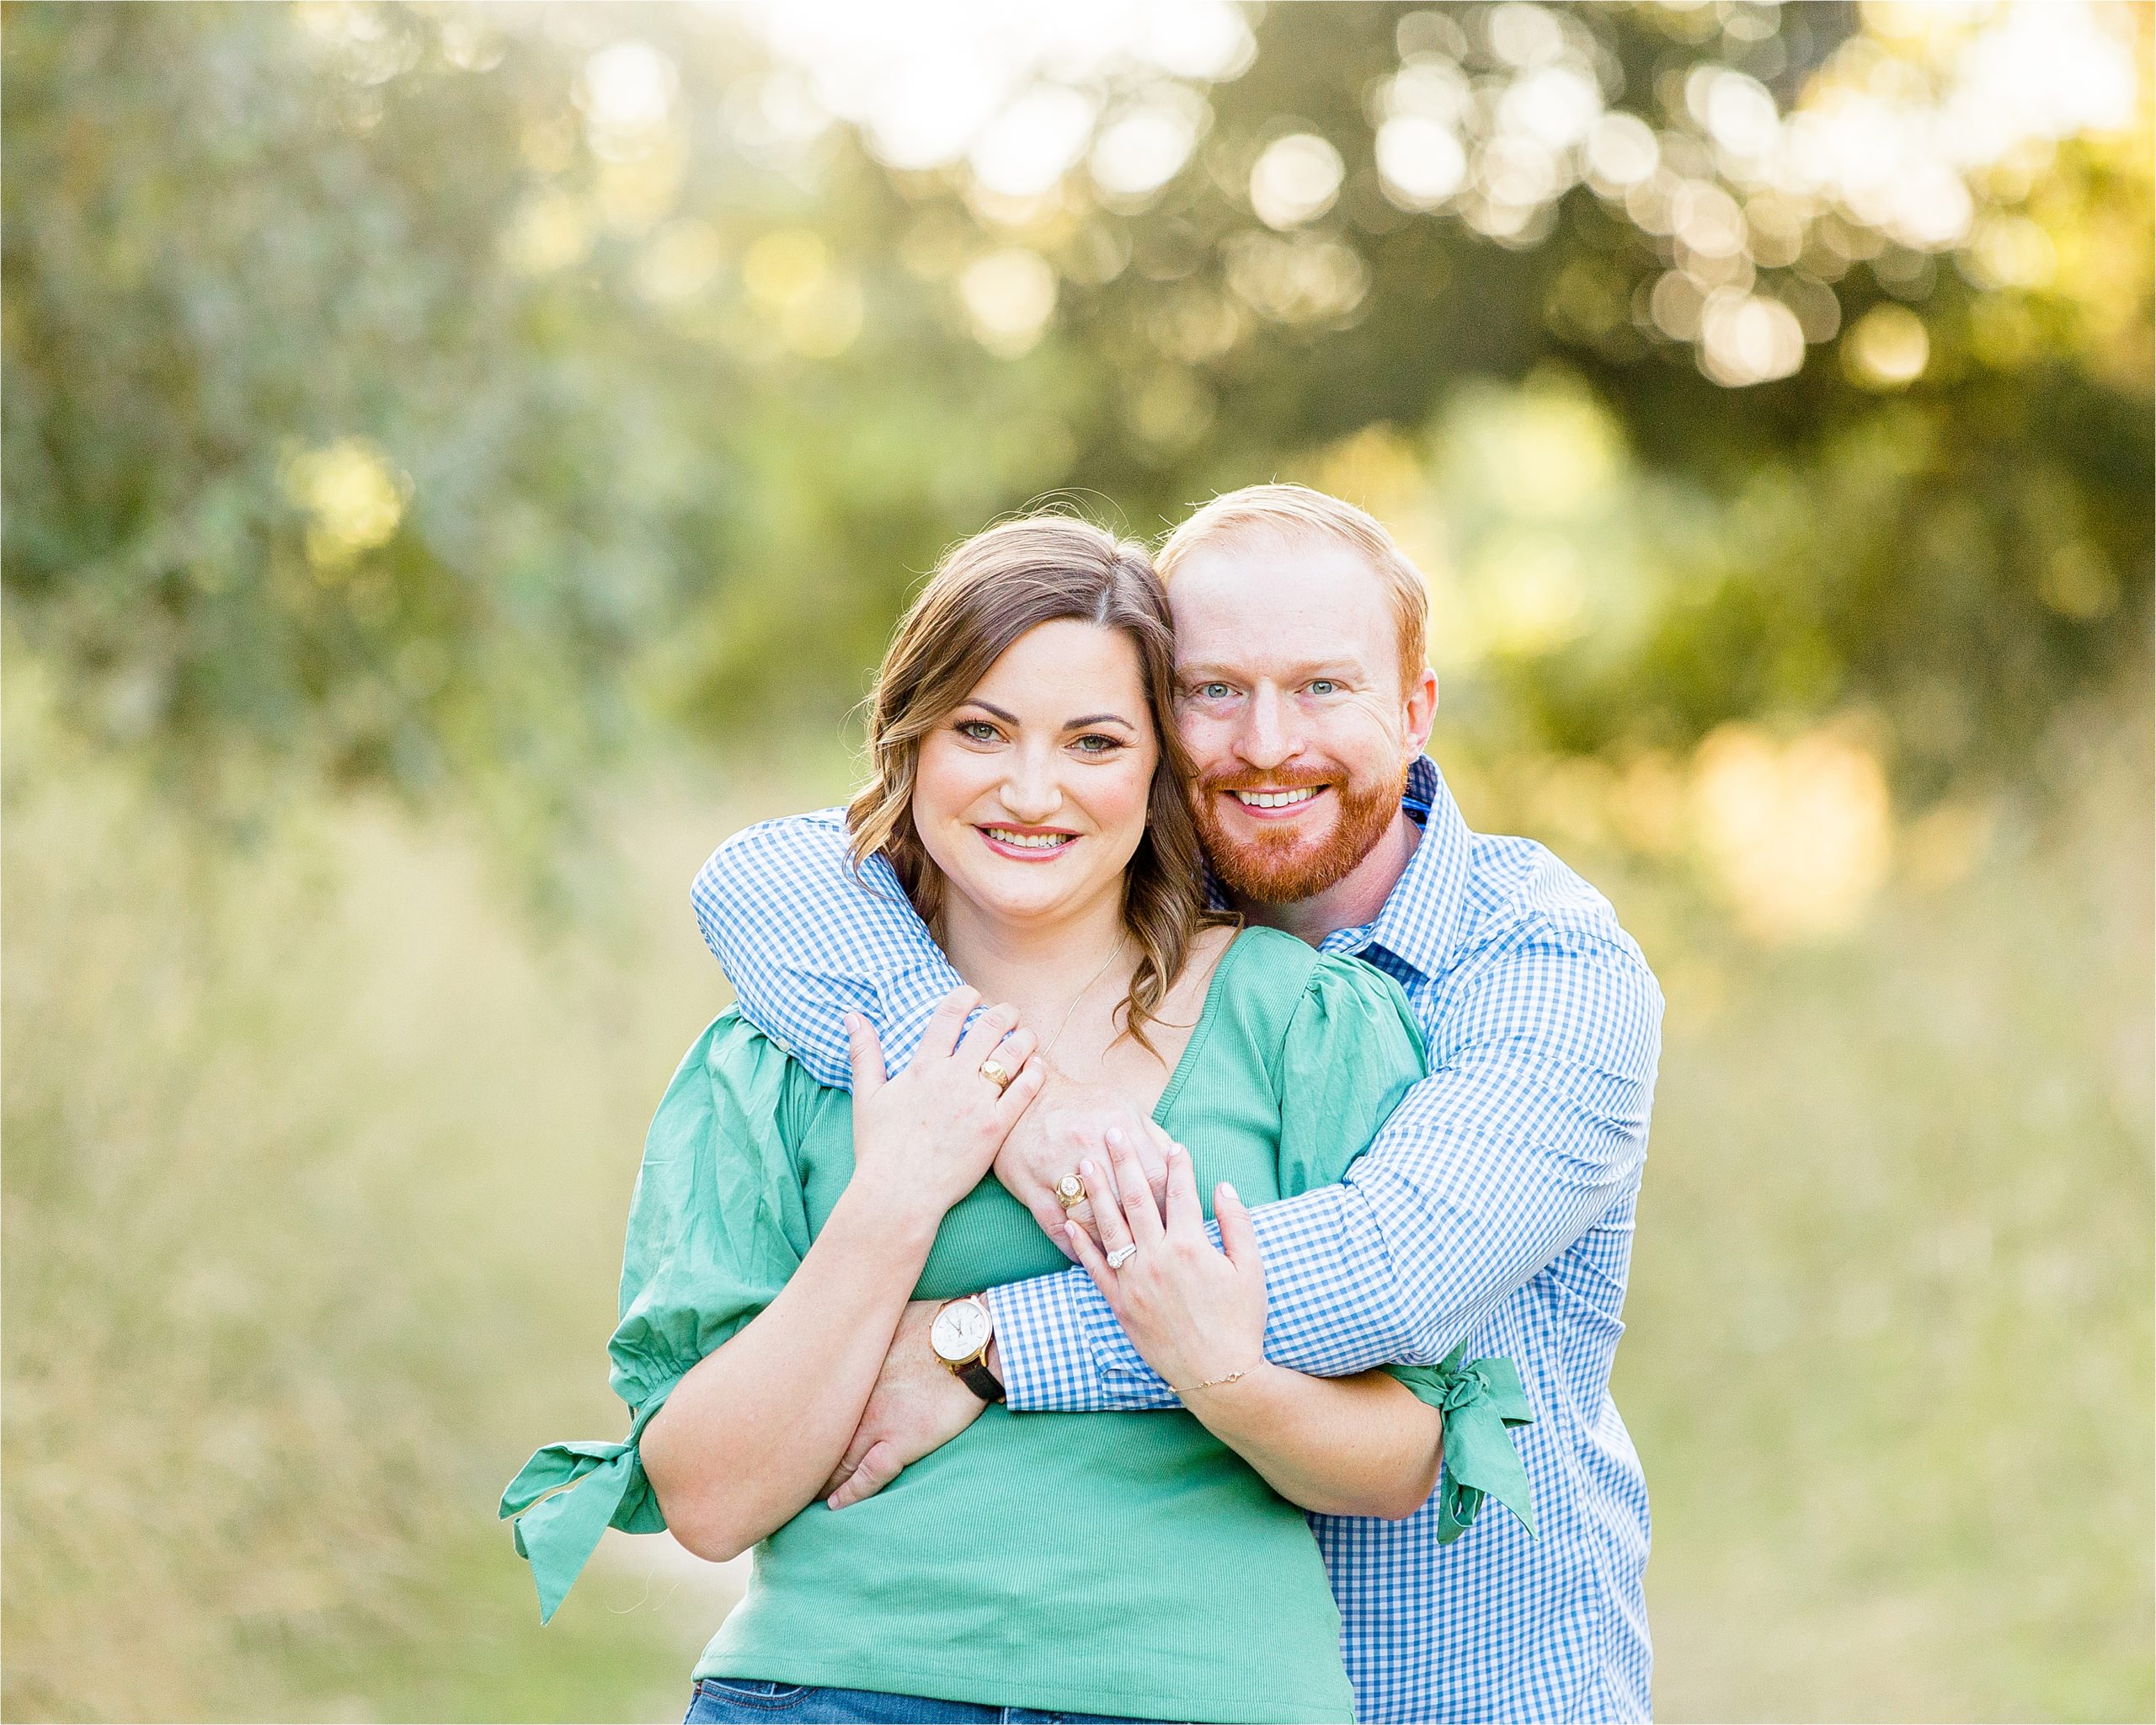 A guy in a blue shirt hugs over his fiance while they smile big at the camera during their sunset engagement session in Boerne, Texas